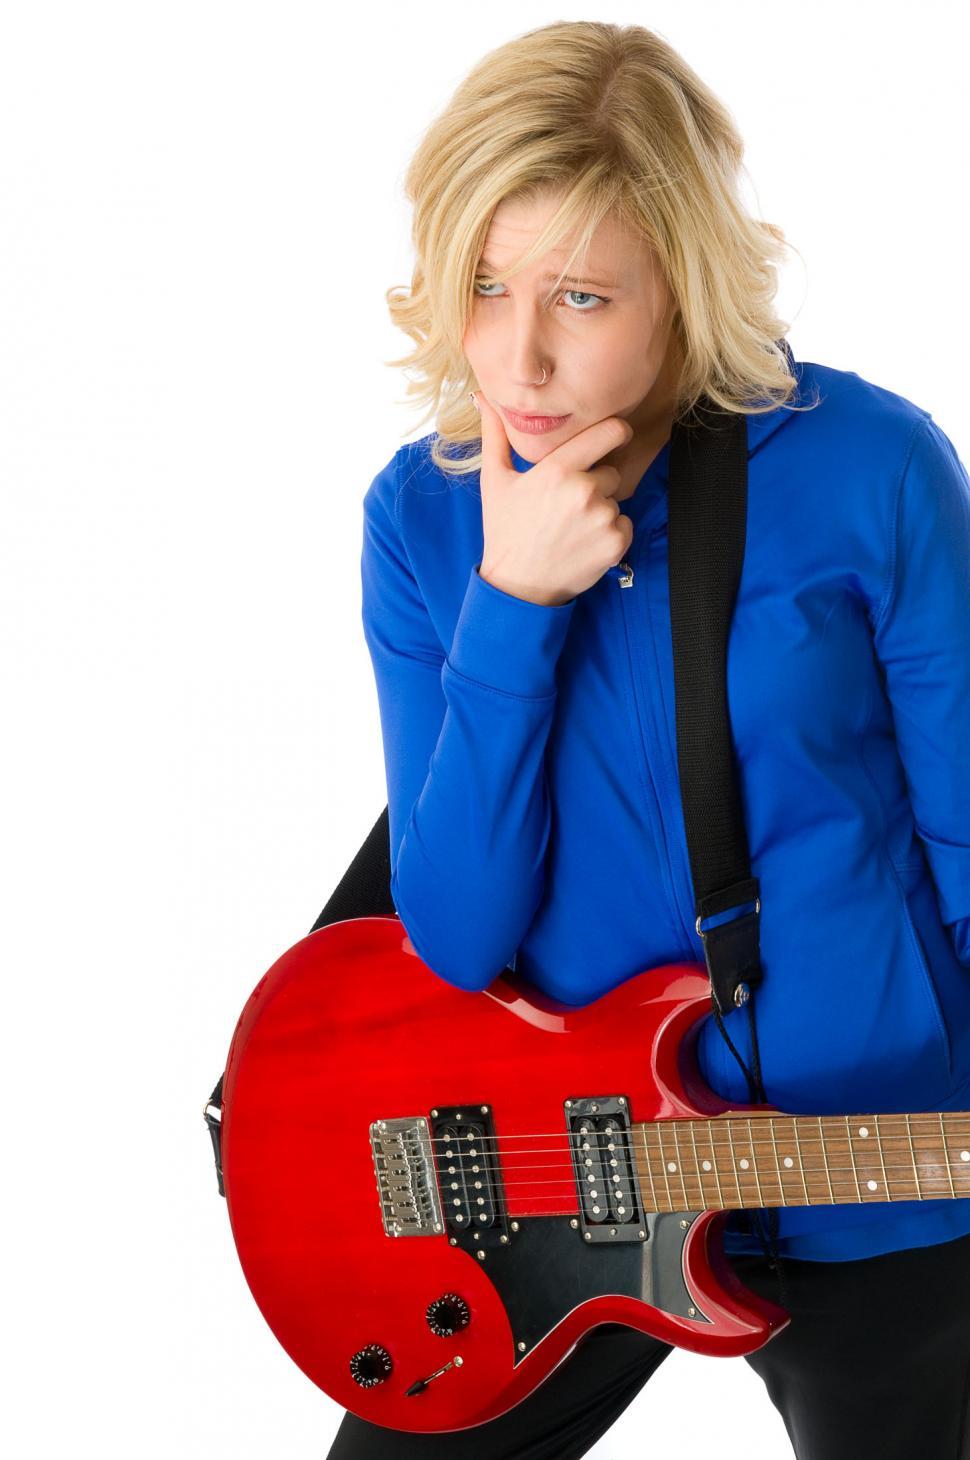 Free Image of Musician  